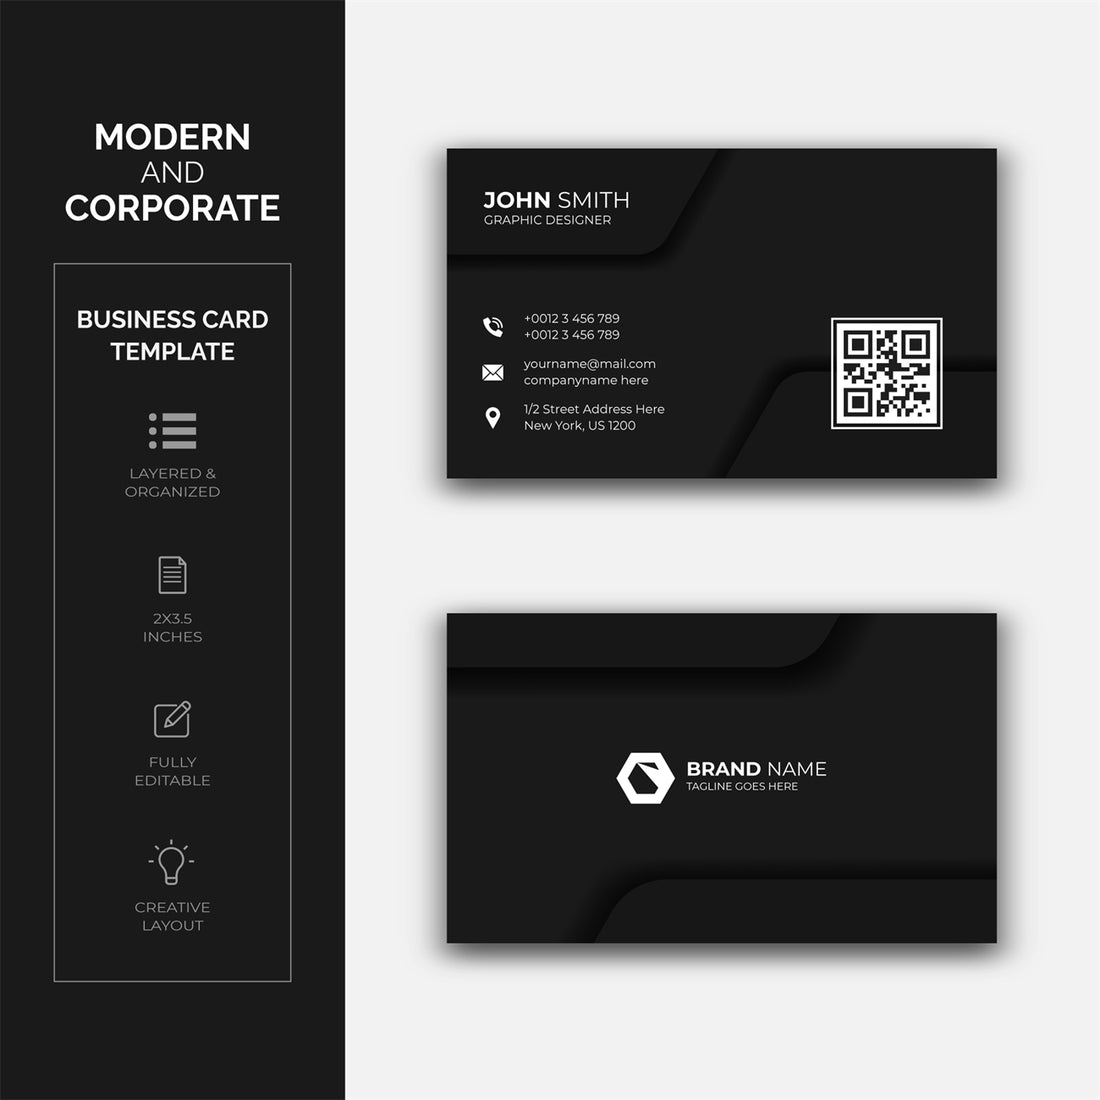 Professional Business Card Templates - Free